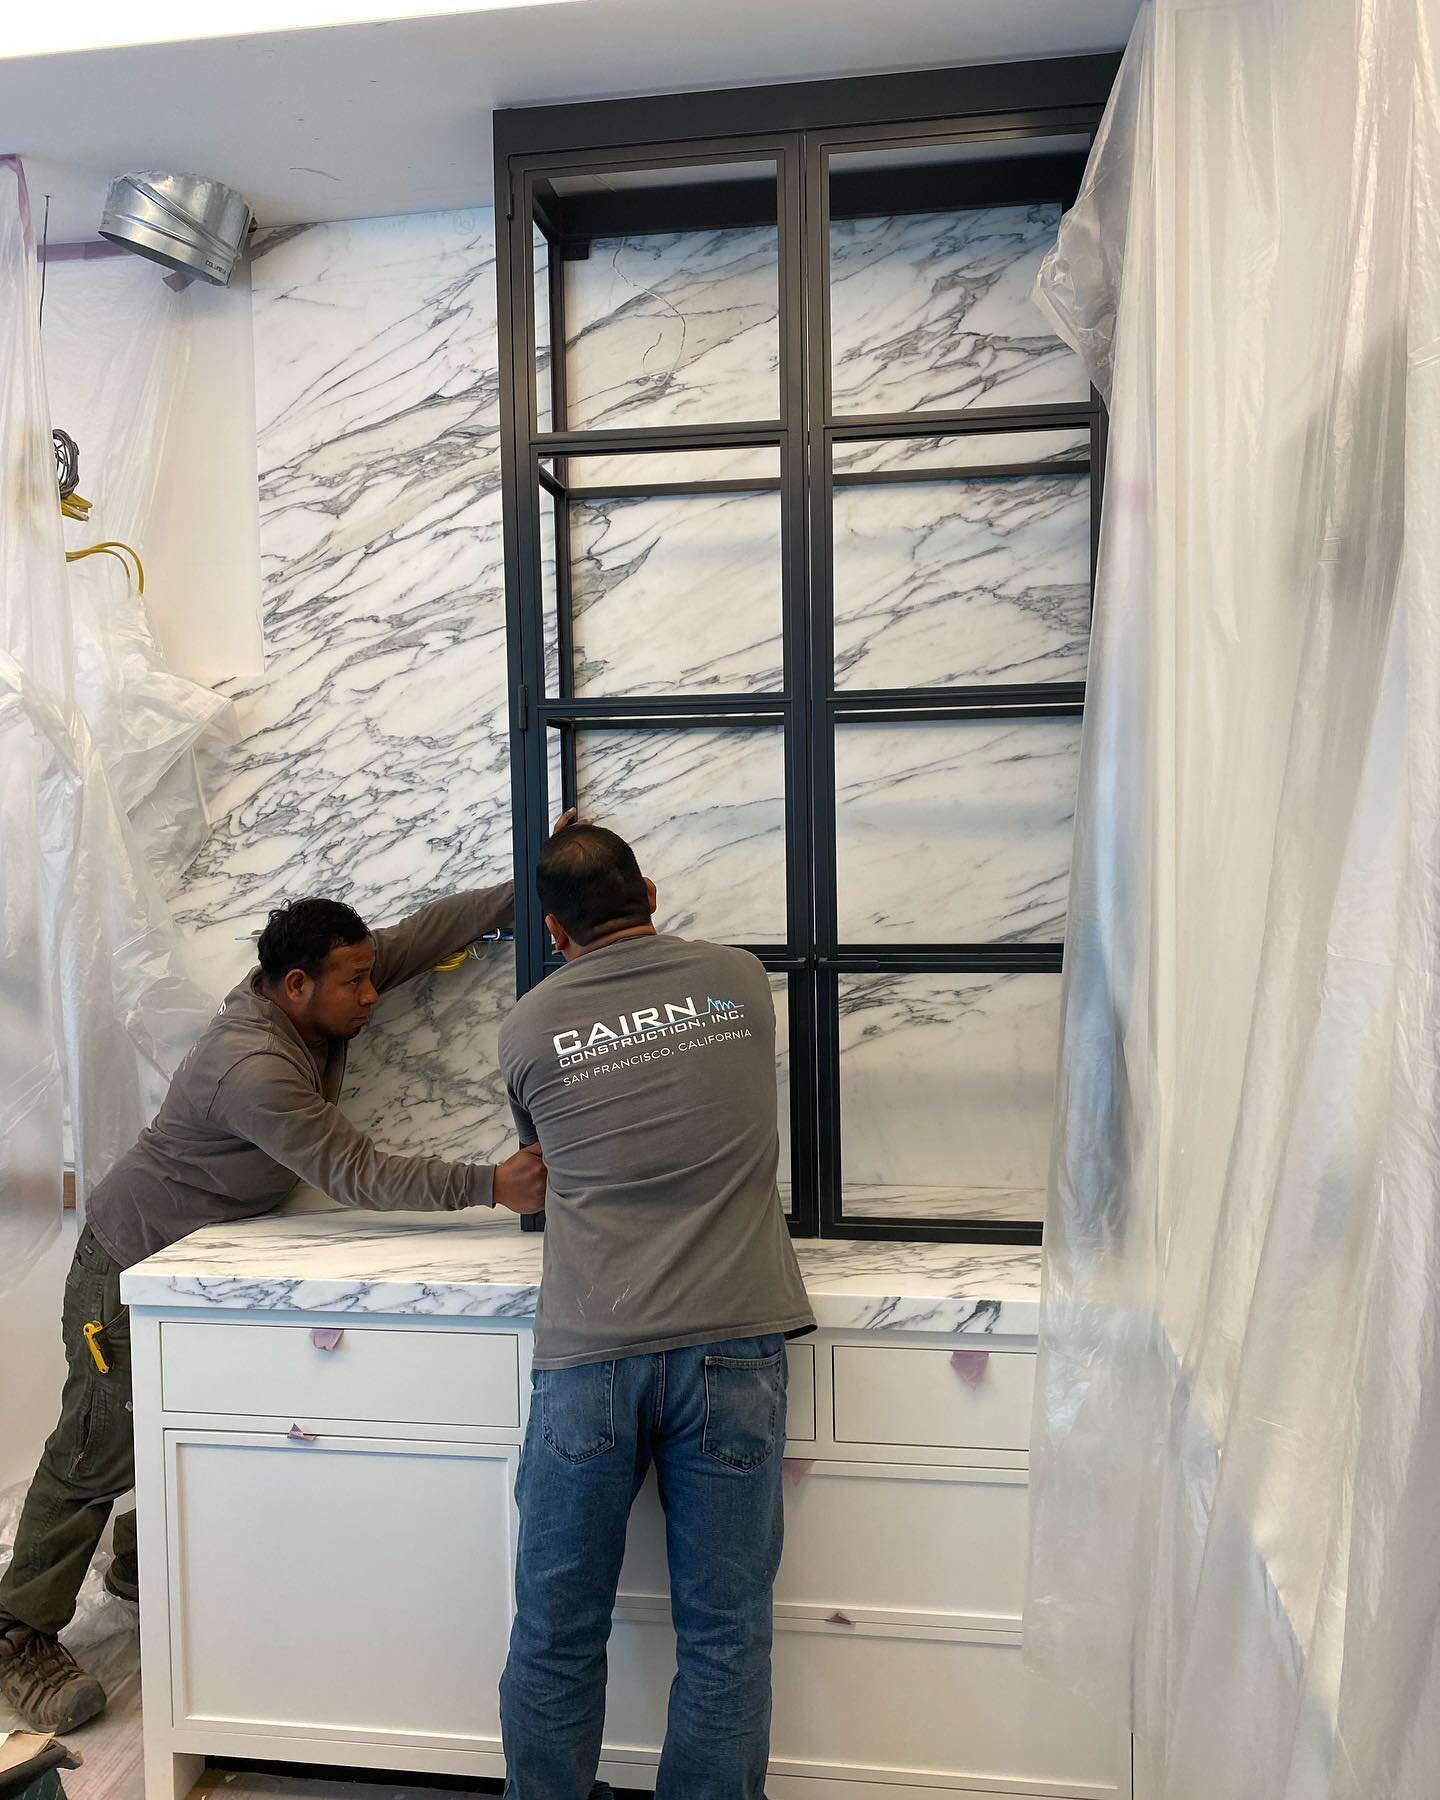 Steel kitchen cabinet install underway at our Jackson street project. Finished photos coming soon!  #customsteel #sanfranciscoconstruction #sfbuilders #sanfranciscohomes #bayareabuilders #sfbuilders